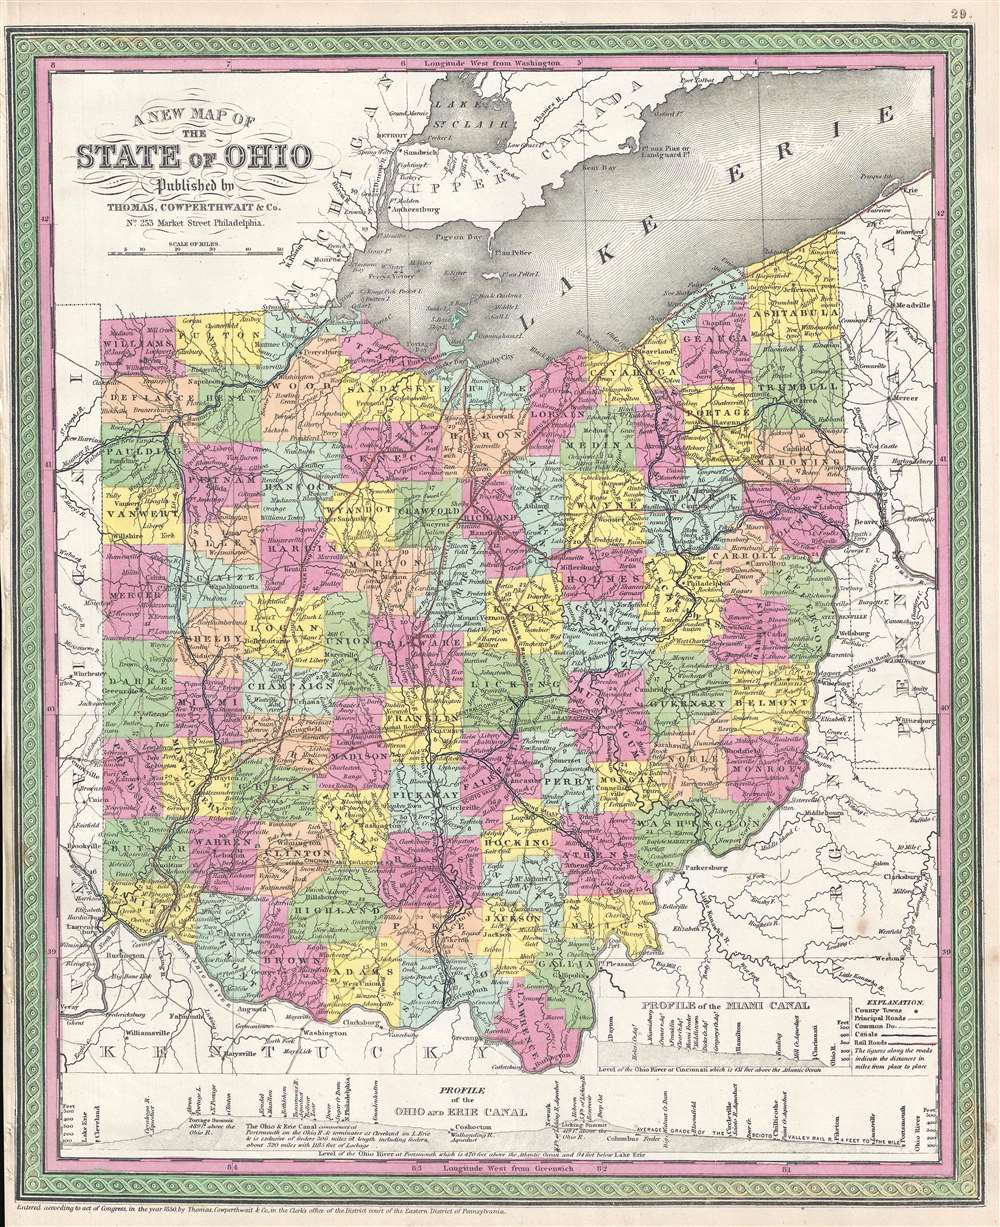 A New Map of the State of Ohio. - Main View